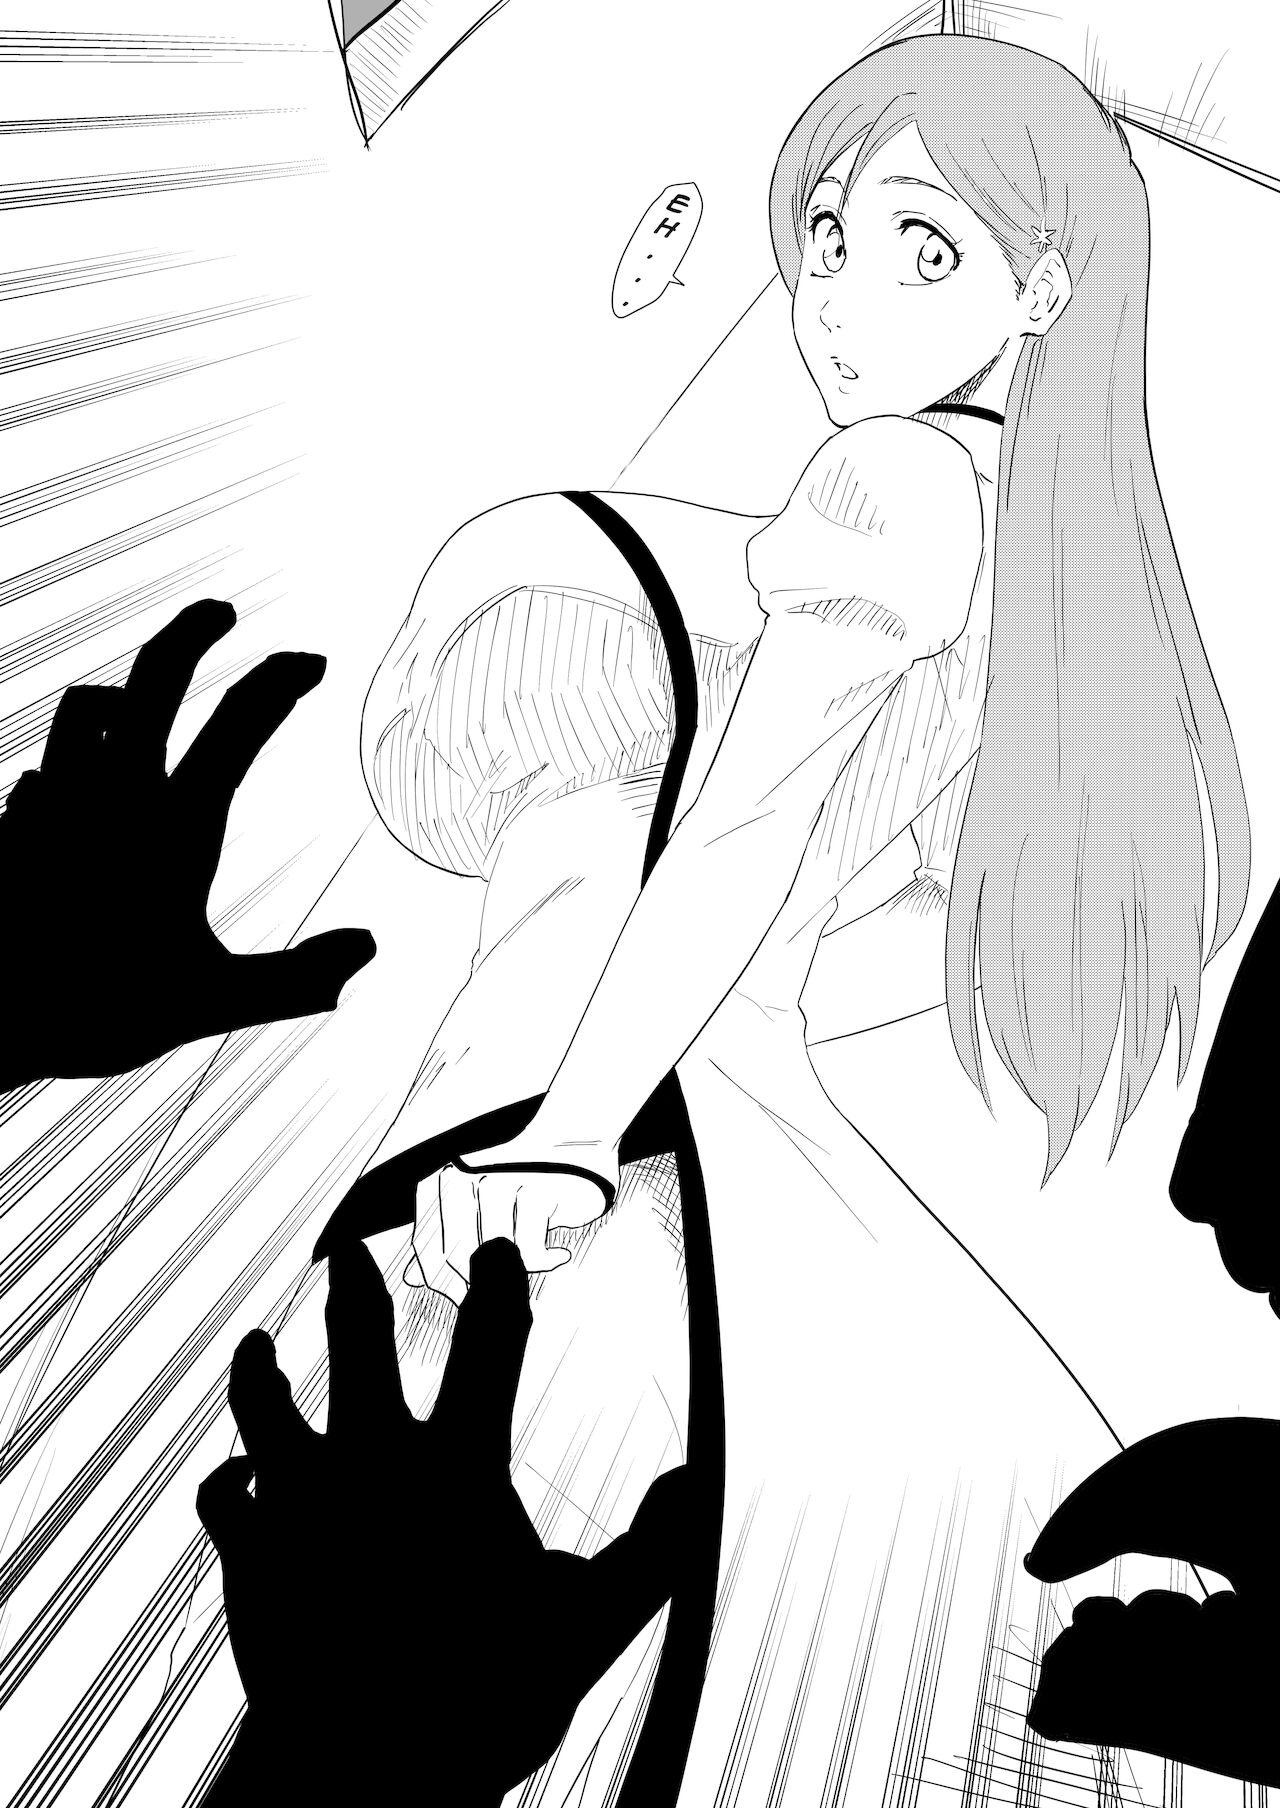 Orihime is attacked by goblin-like hollows 2